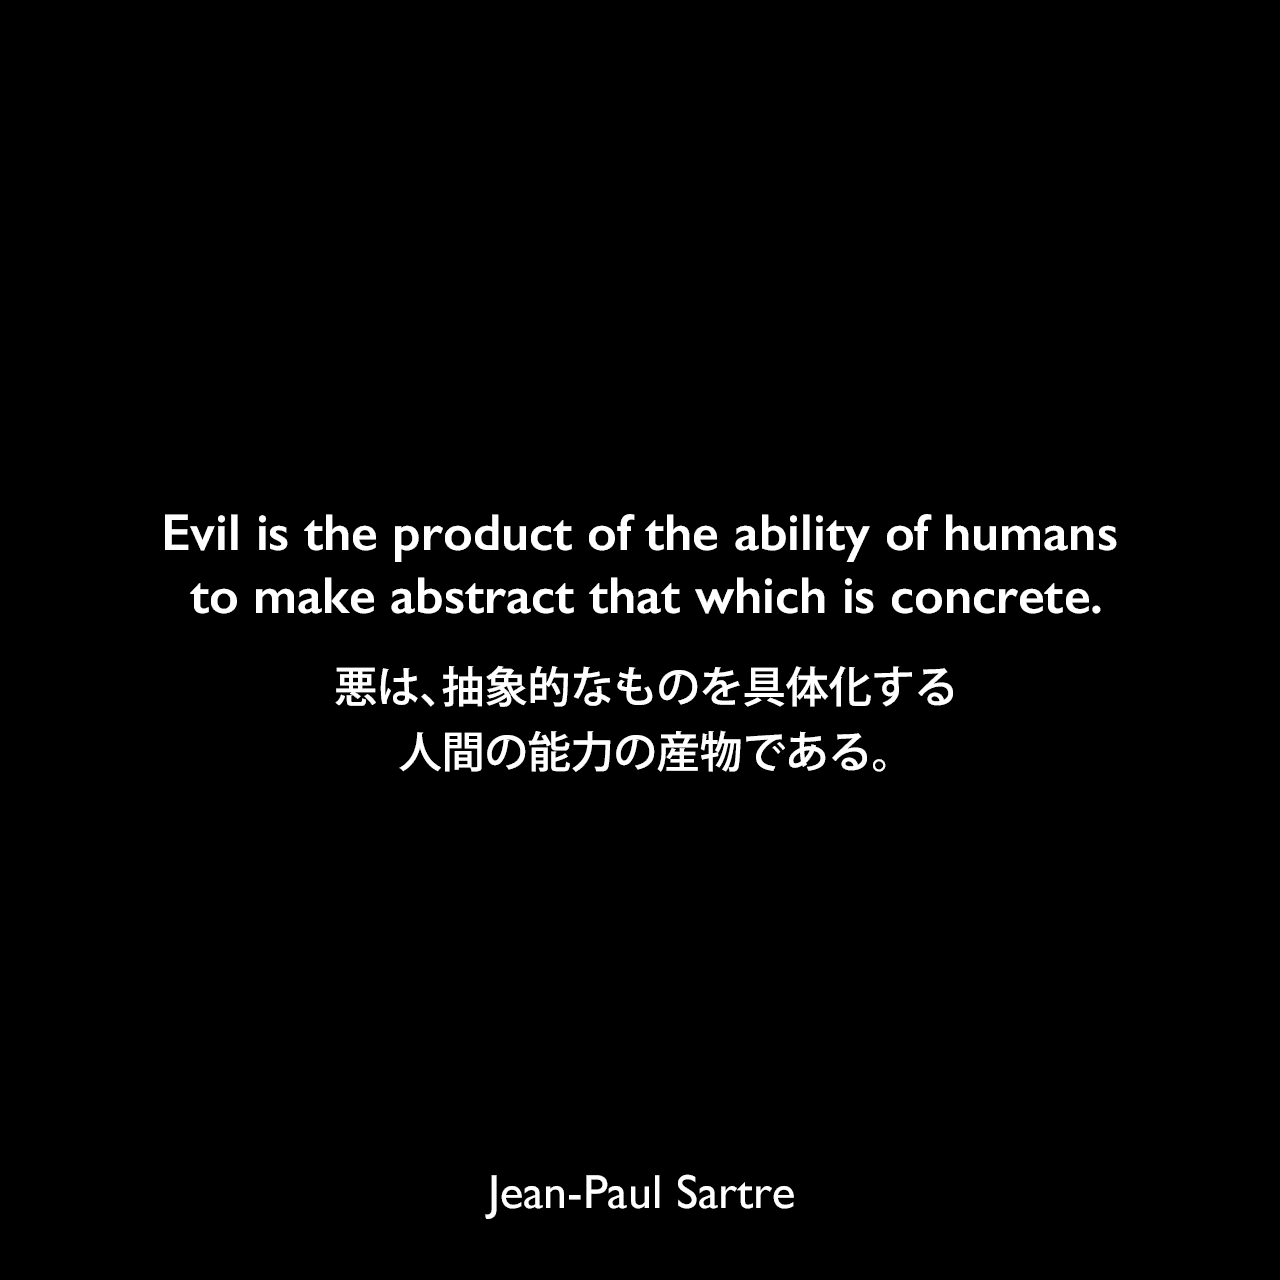 Evil is the product of the ability of humans to make abstract that which is concrete.悪は、抽象的なものを具体化する人間の能力の産物である。Jean-Paul Sartre